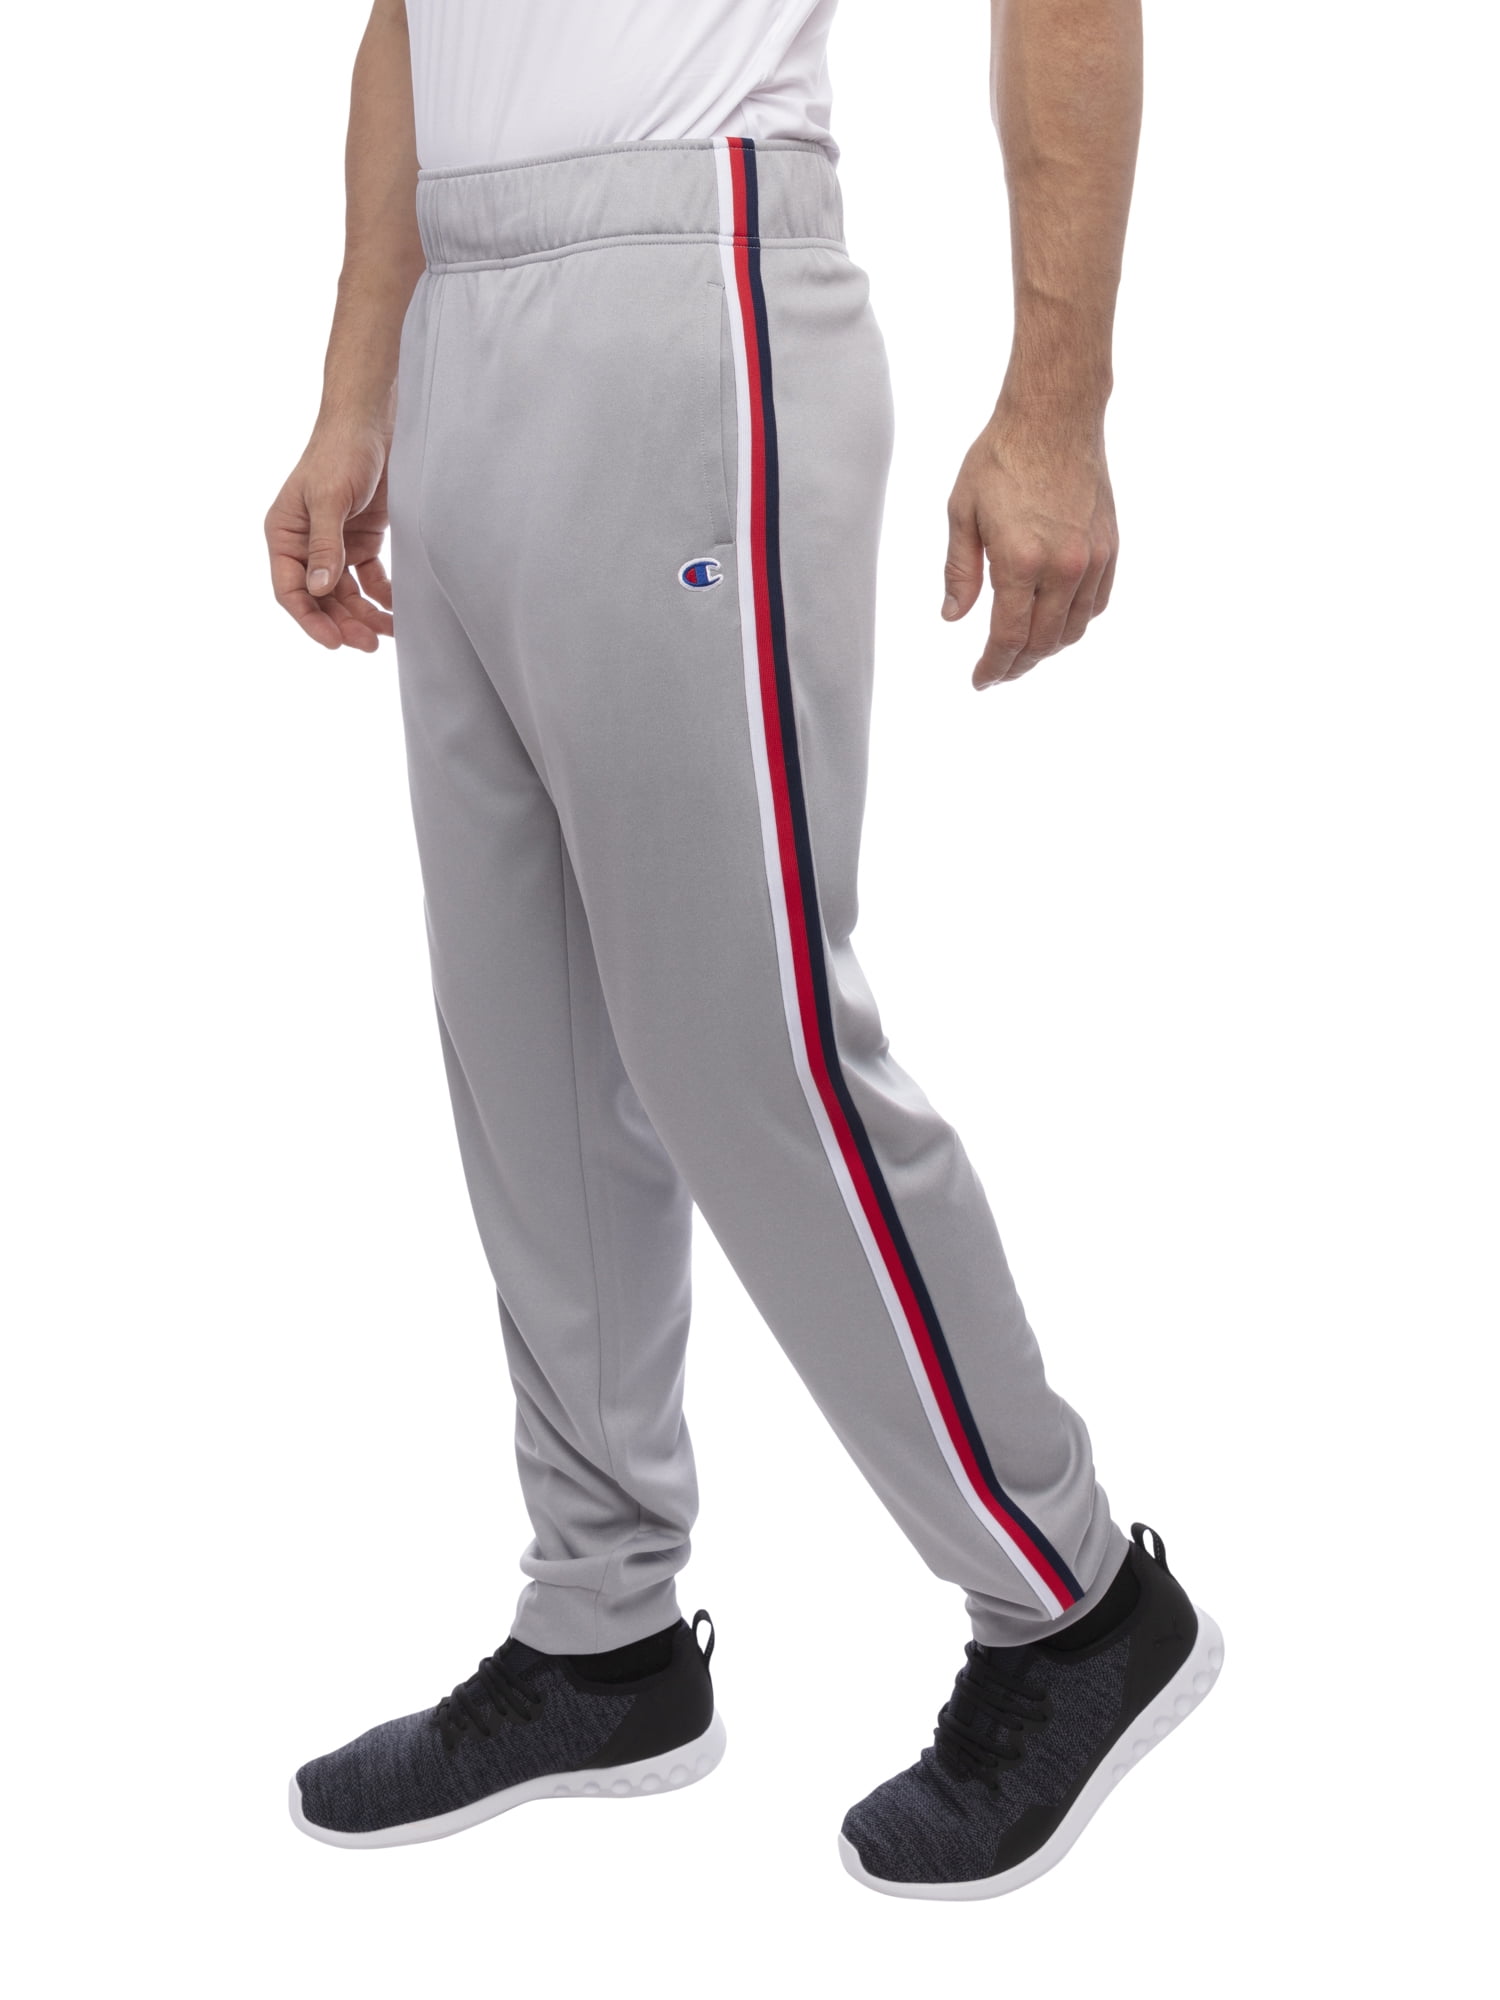 Champion Men's Hybrid Woven Pant, up to Size 2XL